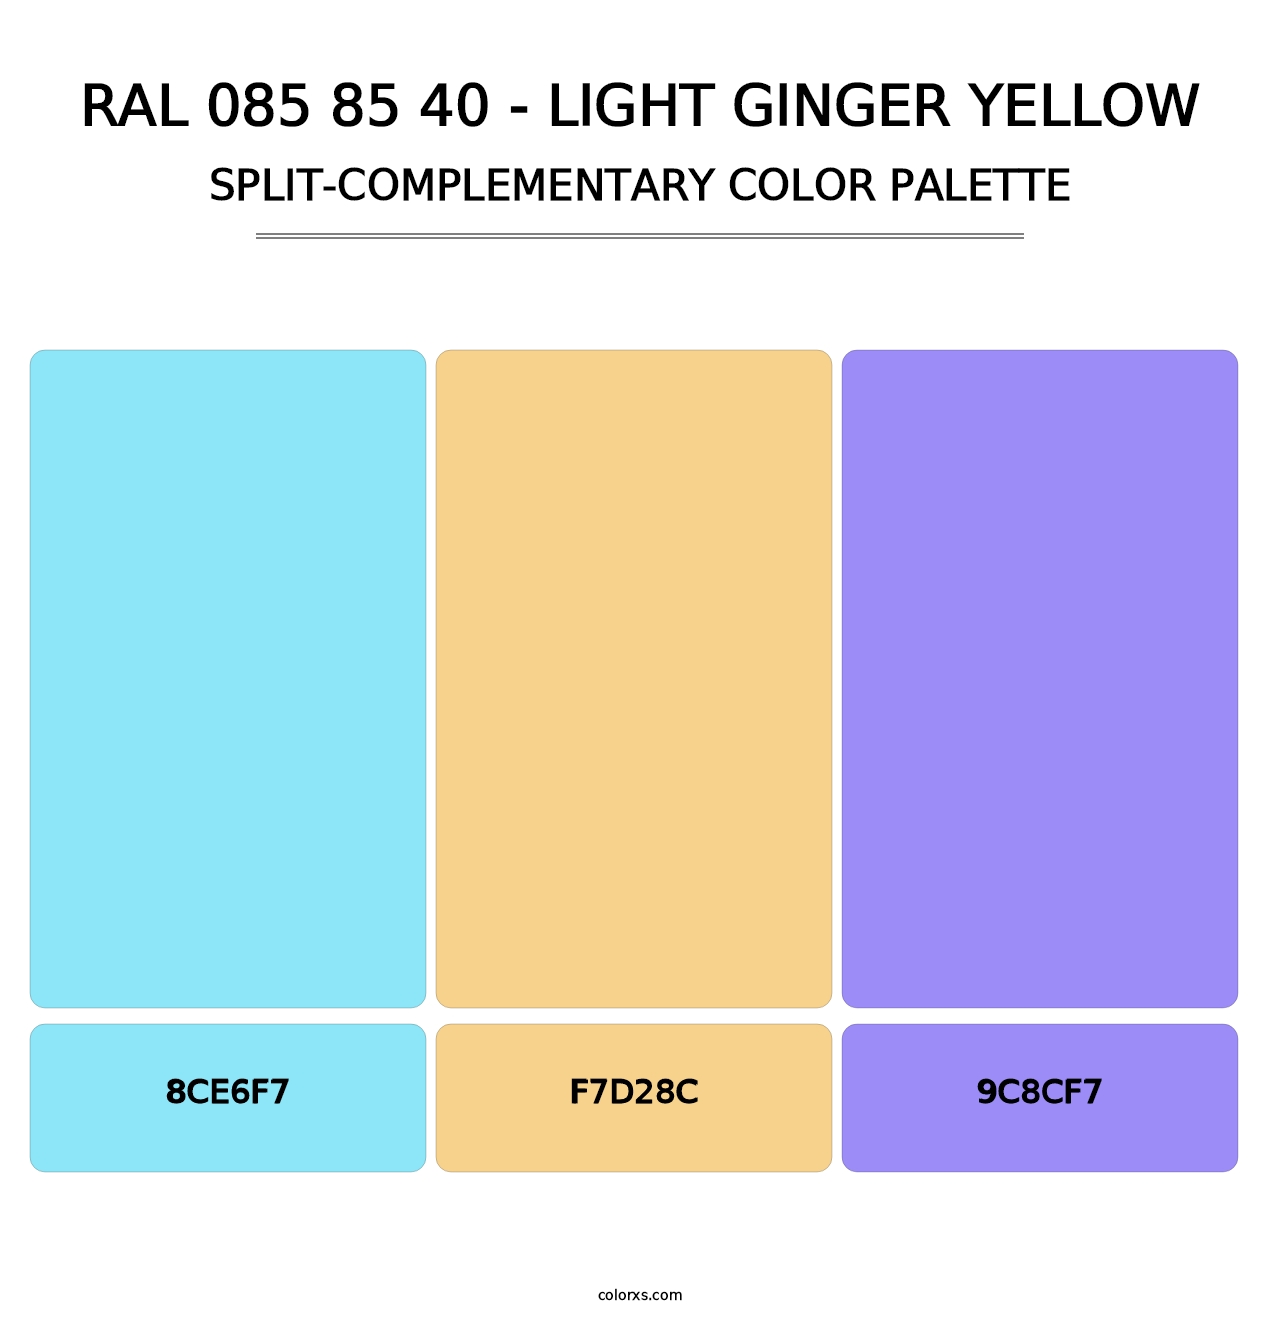 RAL 085 85 40 - Light Ginger Yellow - Split-Complementary Color Palette